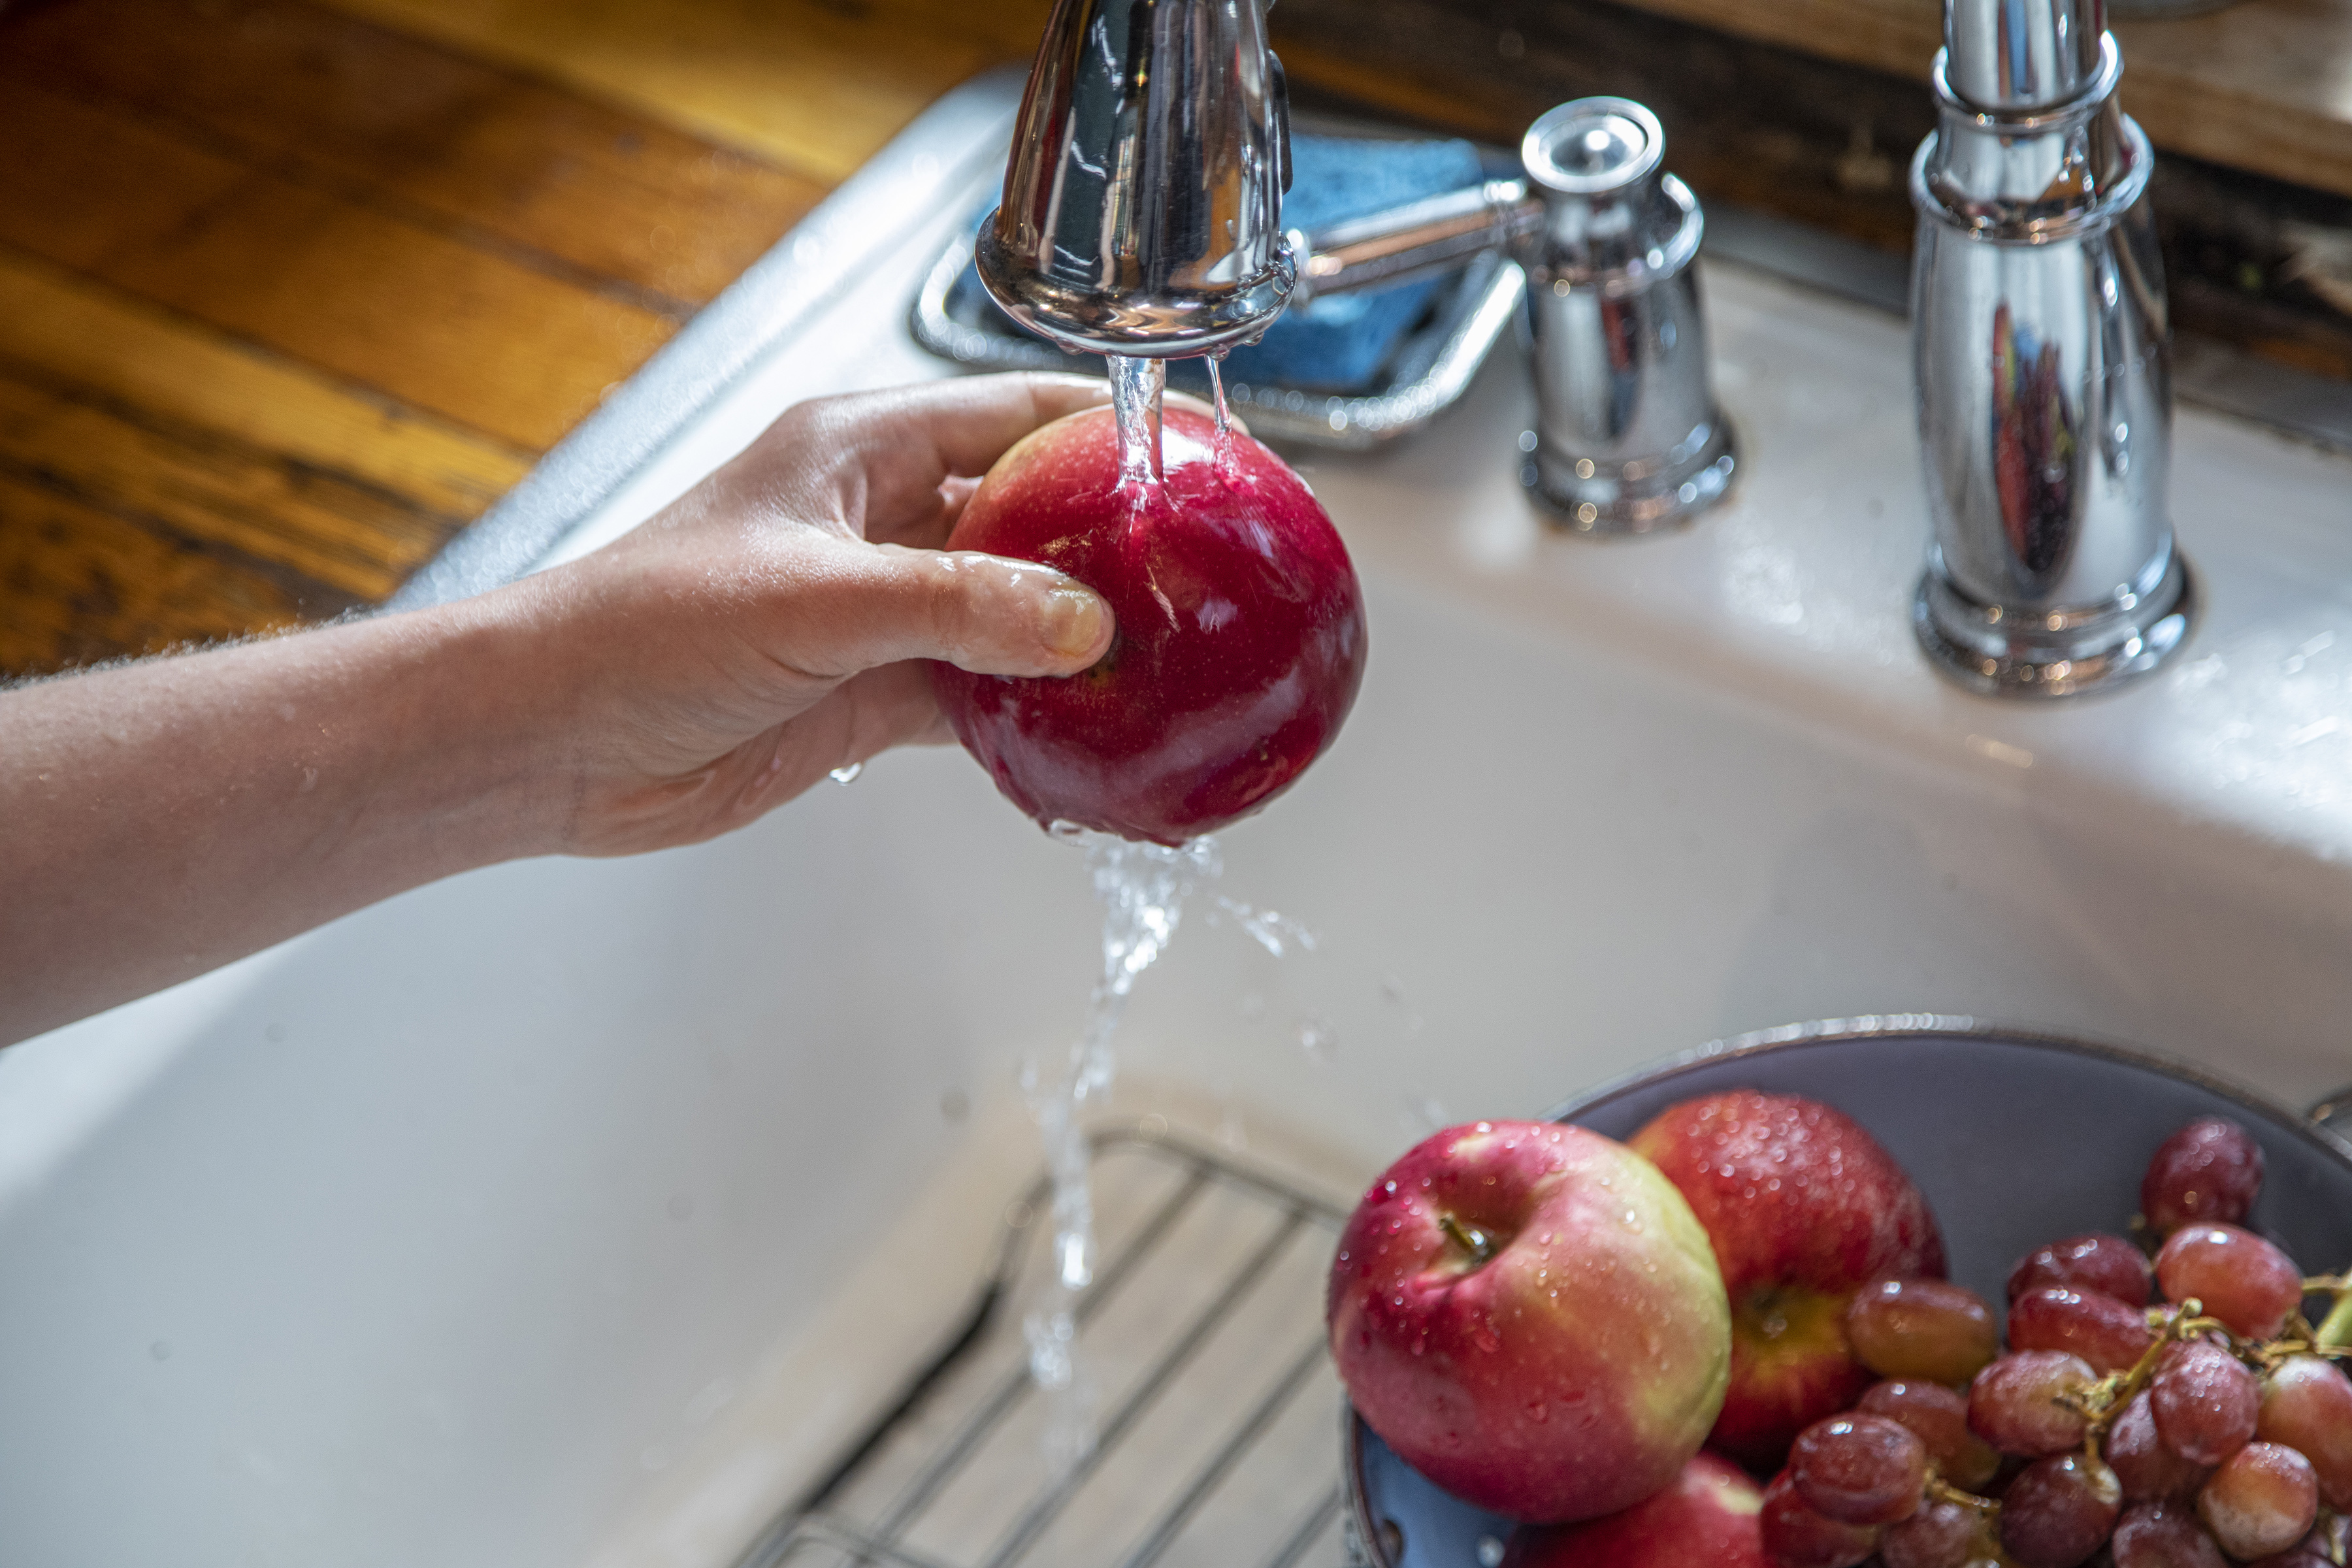 FILE -- Washing fruit in New York, May 21, 2020. To minimize the risk of food poisoning, you really do need to wash produce before eating it, though no special produce washes are required. (Tony Cenicola/The New York Times)